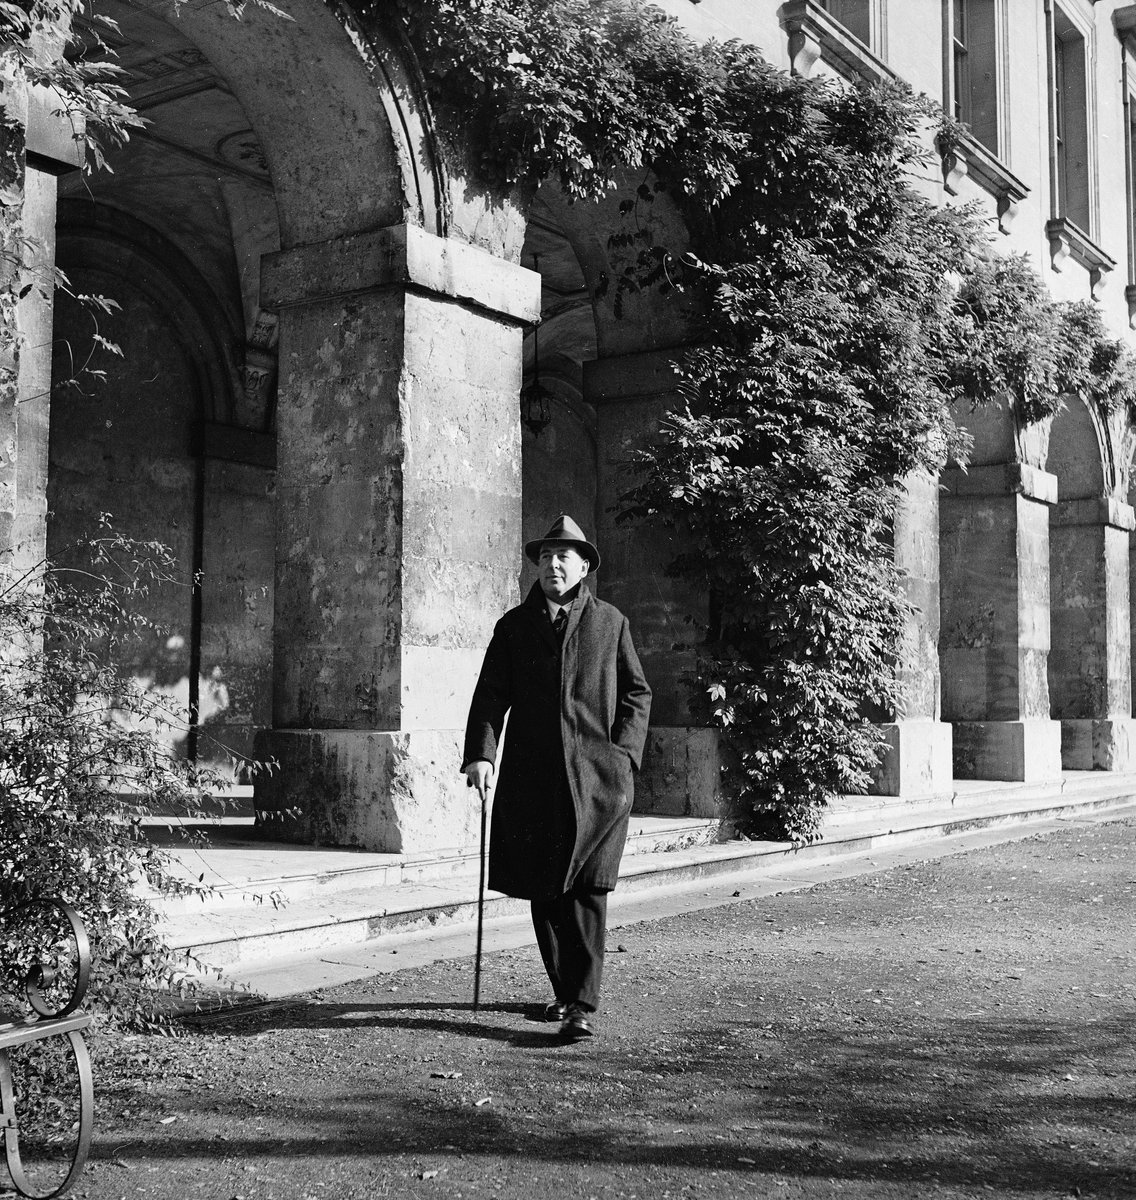 Irish author, scholar, and theologian C.S. Lewis (1898 - 1963) walks past Magdalen College building at Oxford University - Oxford, England, 1946. (📷 Hans Wild/LIFE Picture Collection) #LIFEMagazine #1940s #CSLewis #HansWild #Author #Scholar #Theologian #England